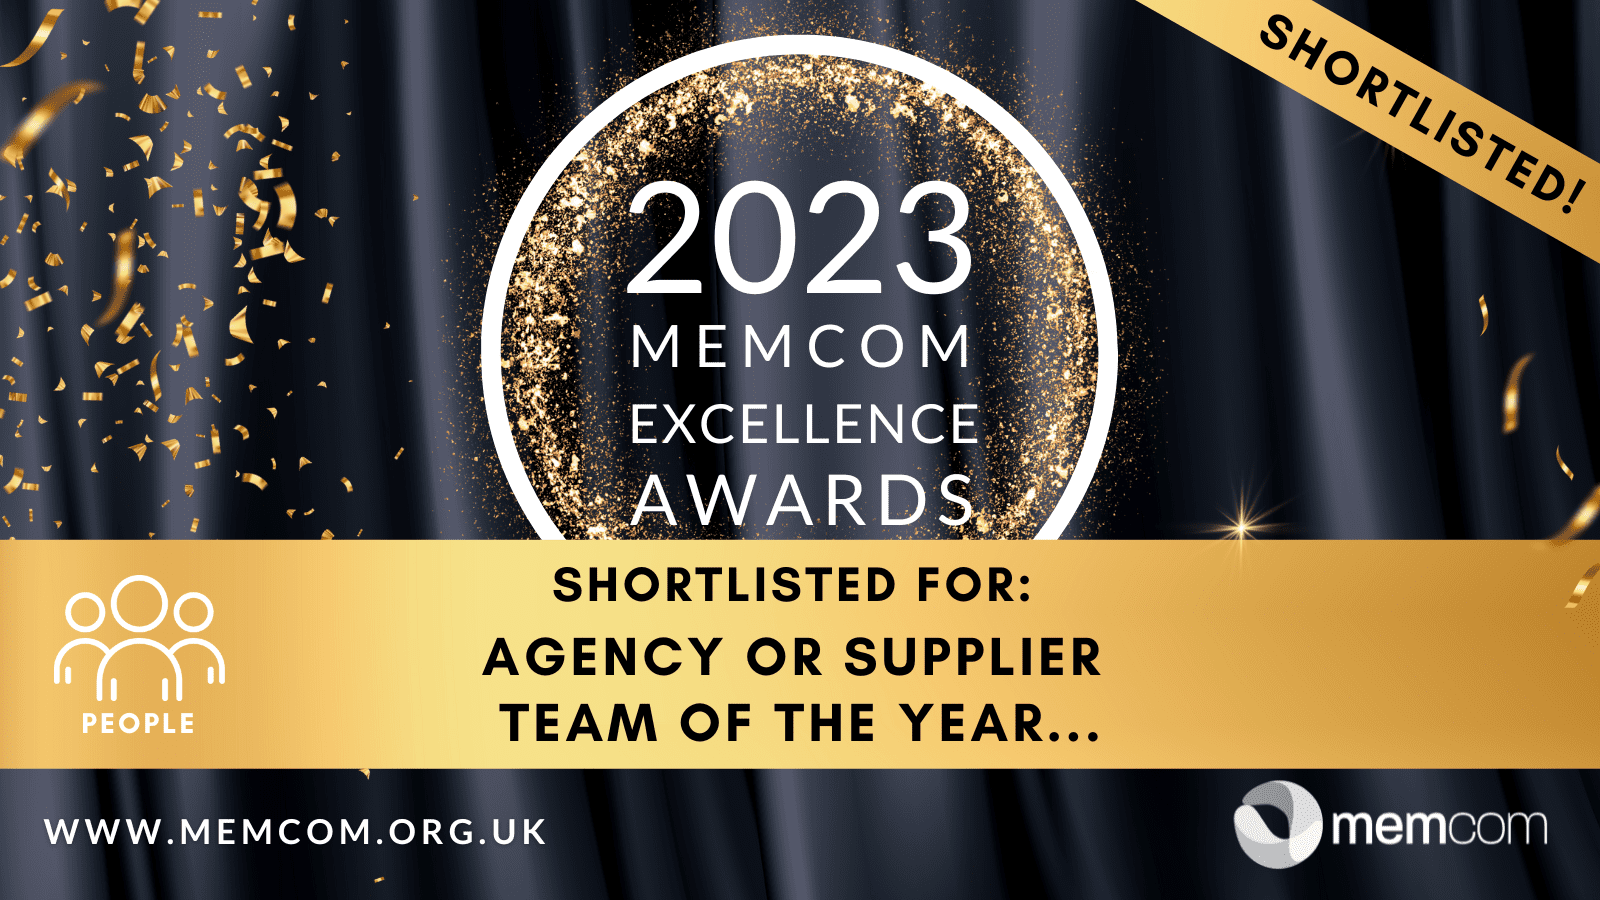 Memcom Awards Nomination Graphic for 2023 Agency or Supplier of the Year Shortlisting